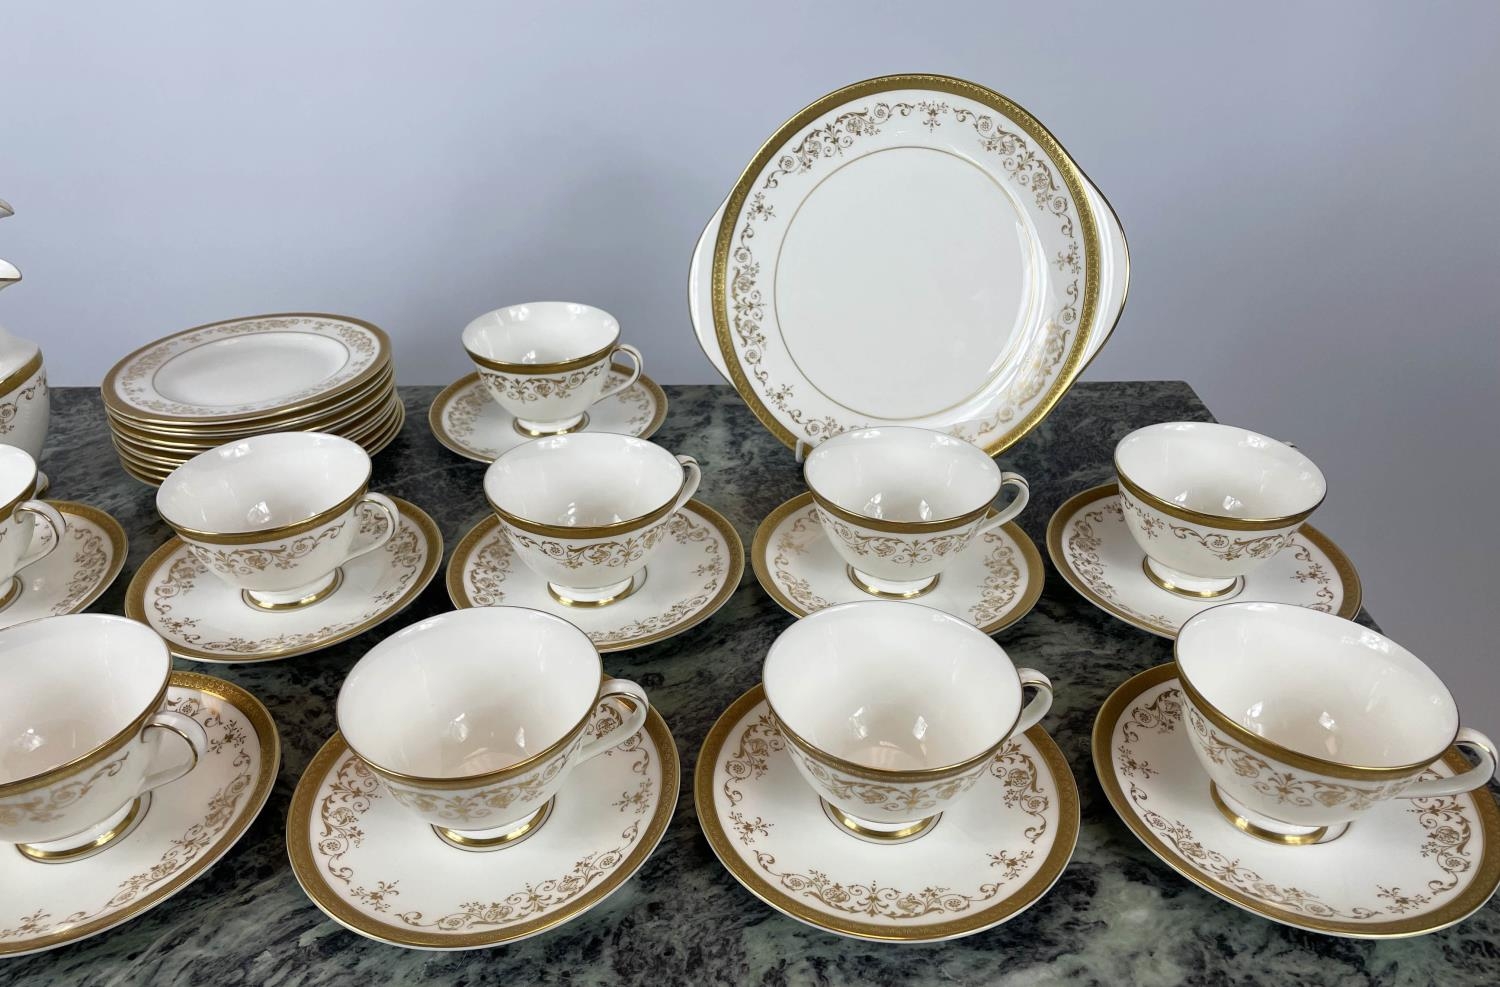 TEA SERVICE, Royal Doulton Belmount pattern including 13 tea cups and 12 saucers, 11 plates - Image 3 of 7